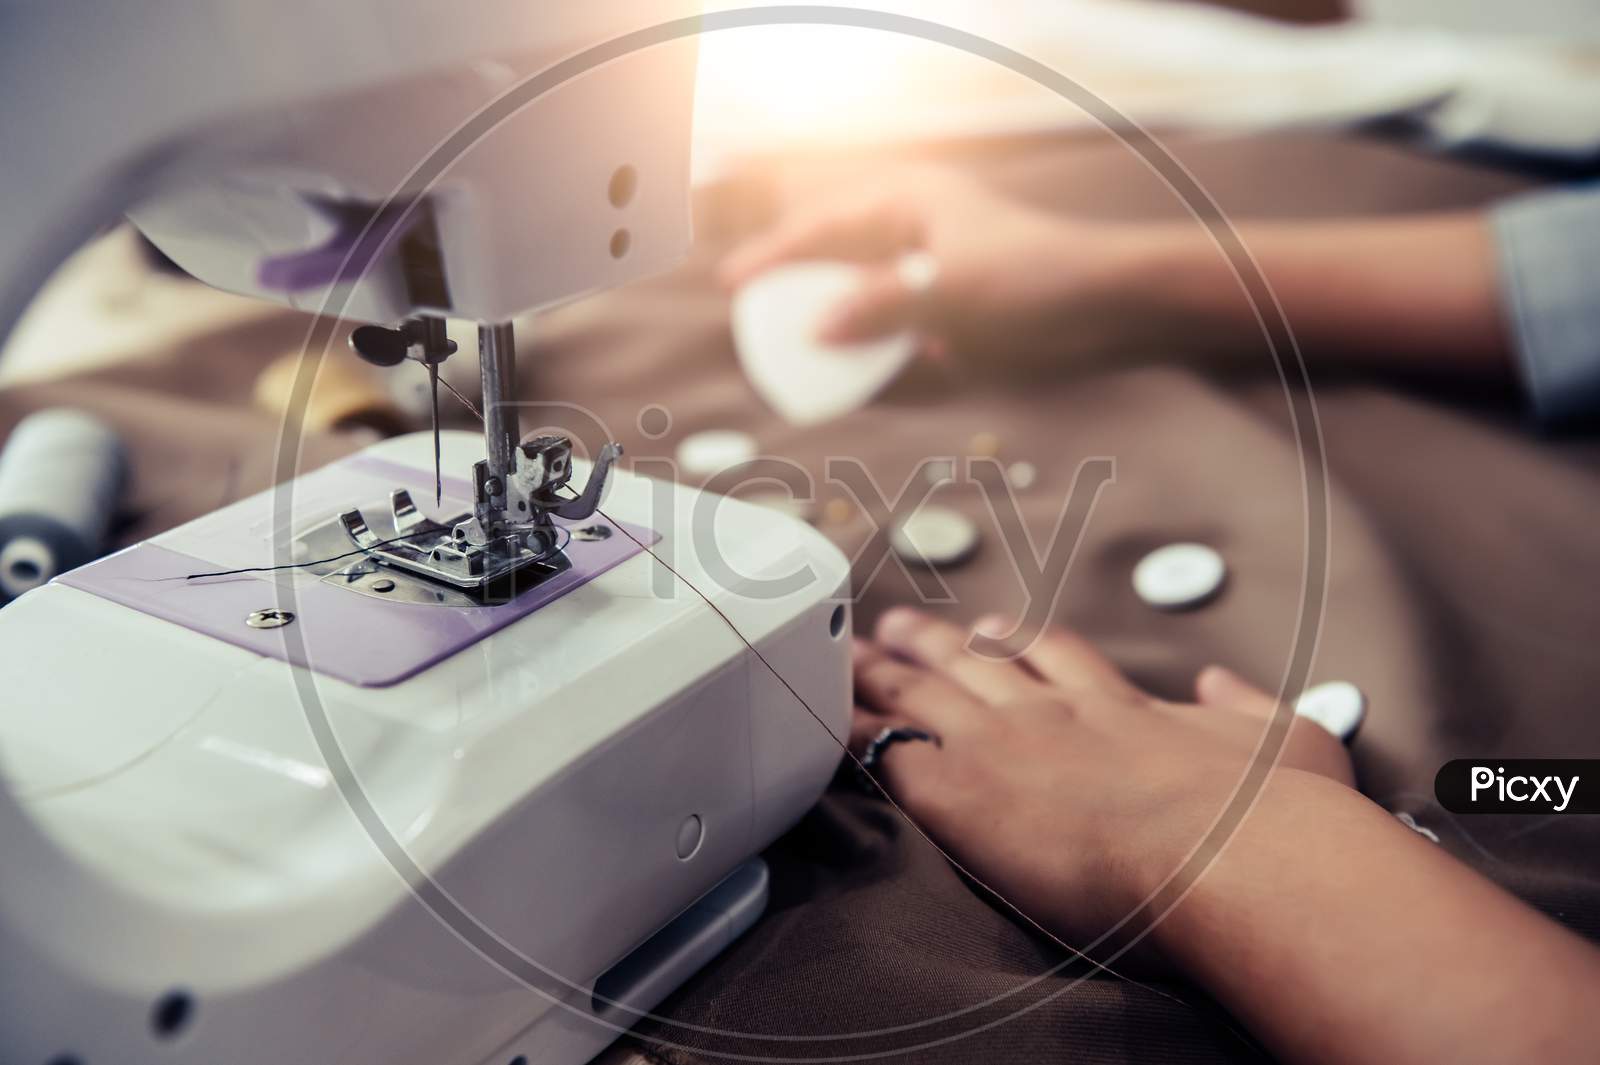 Closeup Of Sewing Machine With Dressmaker Designing New Fashion Dress Fabric Background. Fashion Designer Tailor Or Sewer In Workshop Designing New Collection Cloth. Business Owner And Entrepreneur